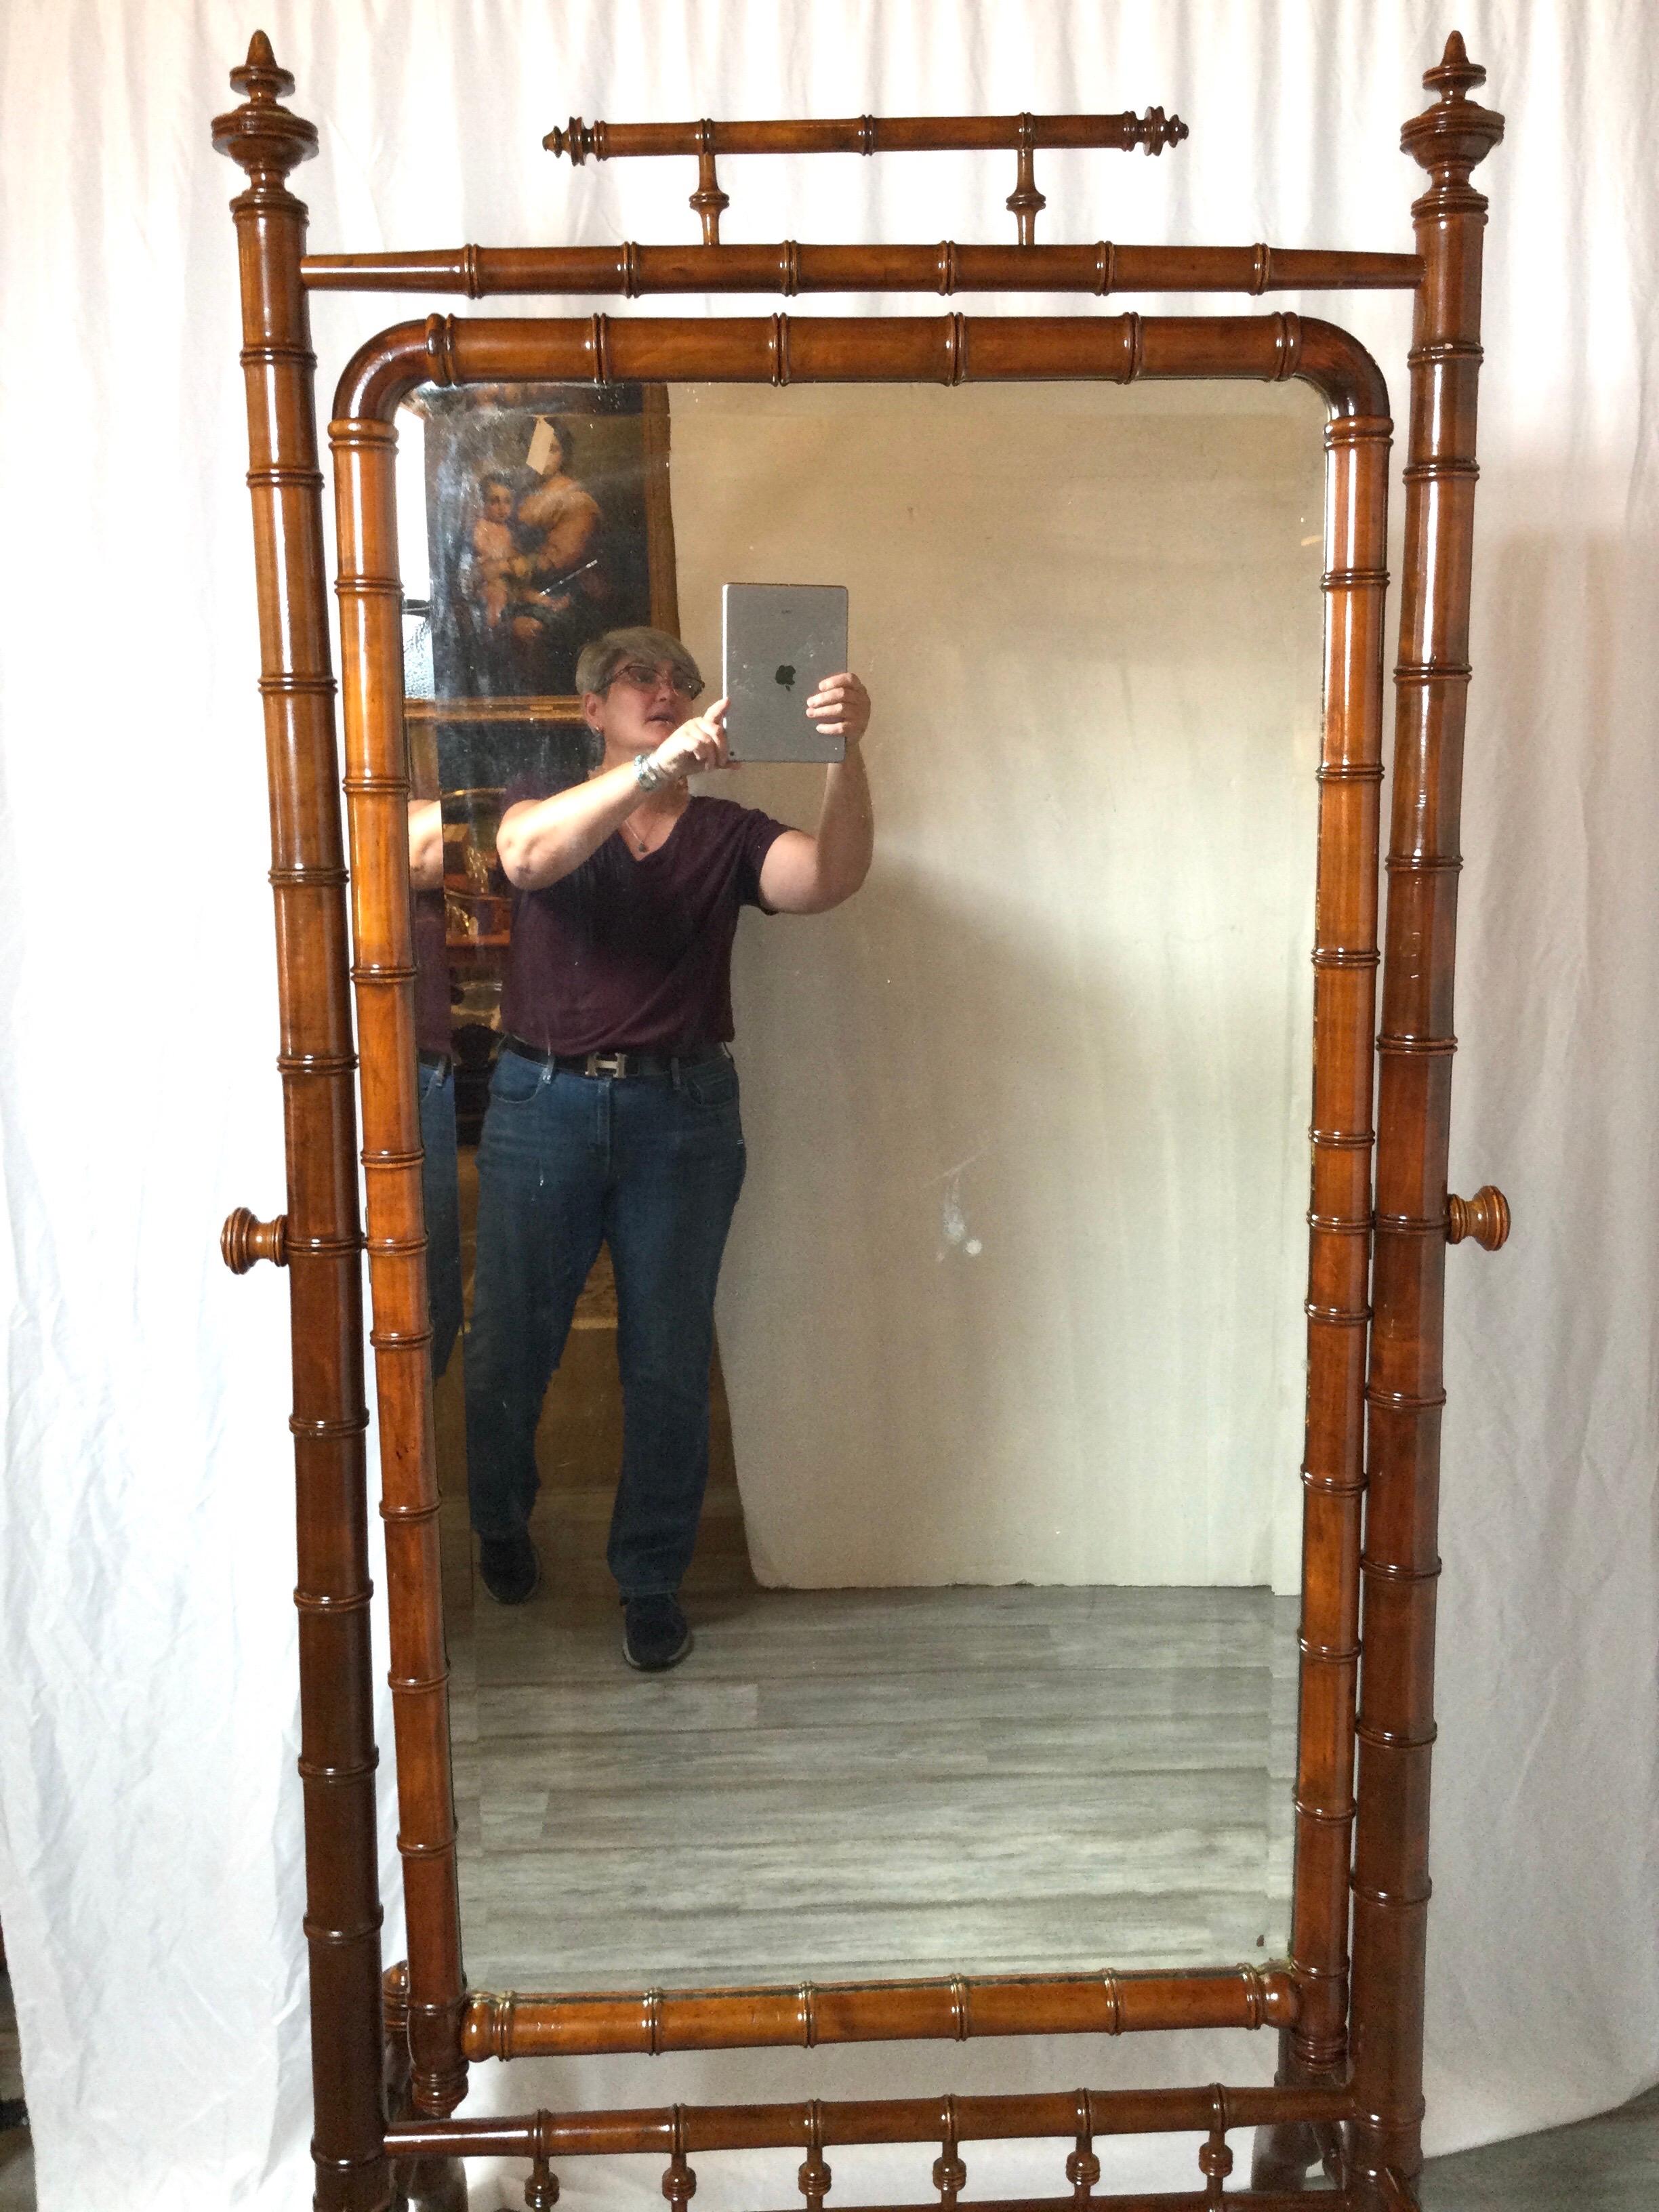 Rare Circa 1890's Late Victorian Chestnut Faux bamboo Cheval dressing mirror,
Faux carved wooden frame with original beveled mirror, some ghosting in mirror but you can easily put a new one in if so desired. Stunning look for any